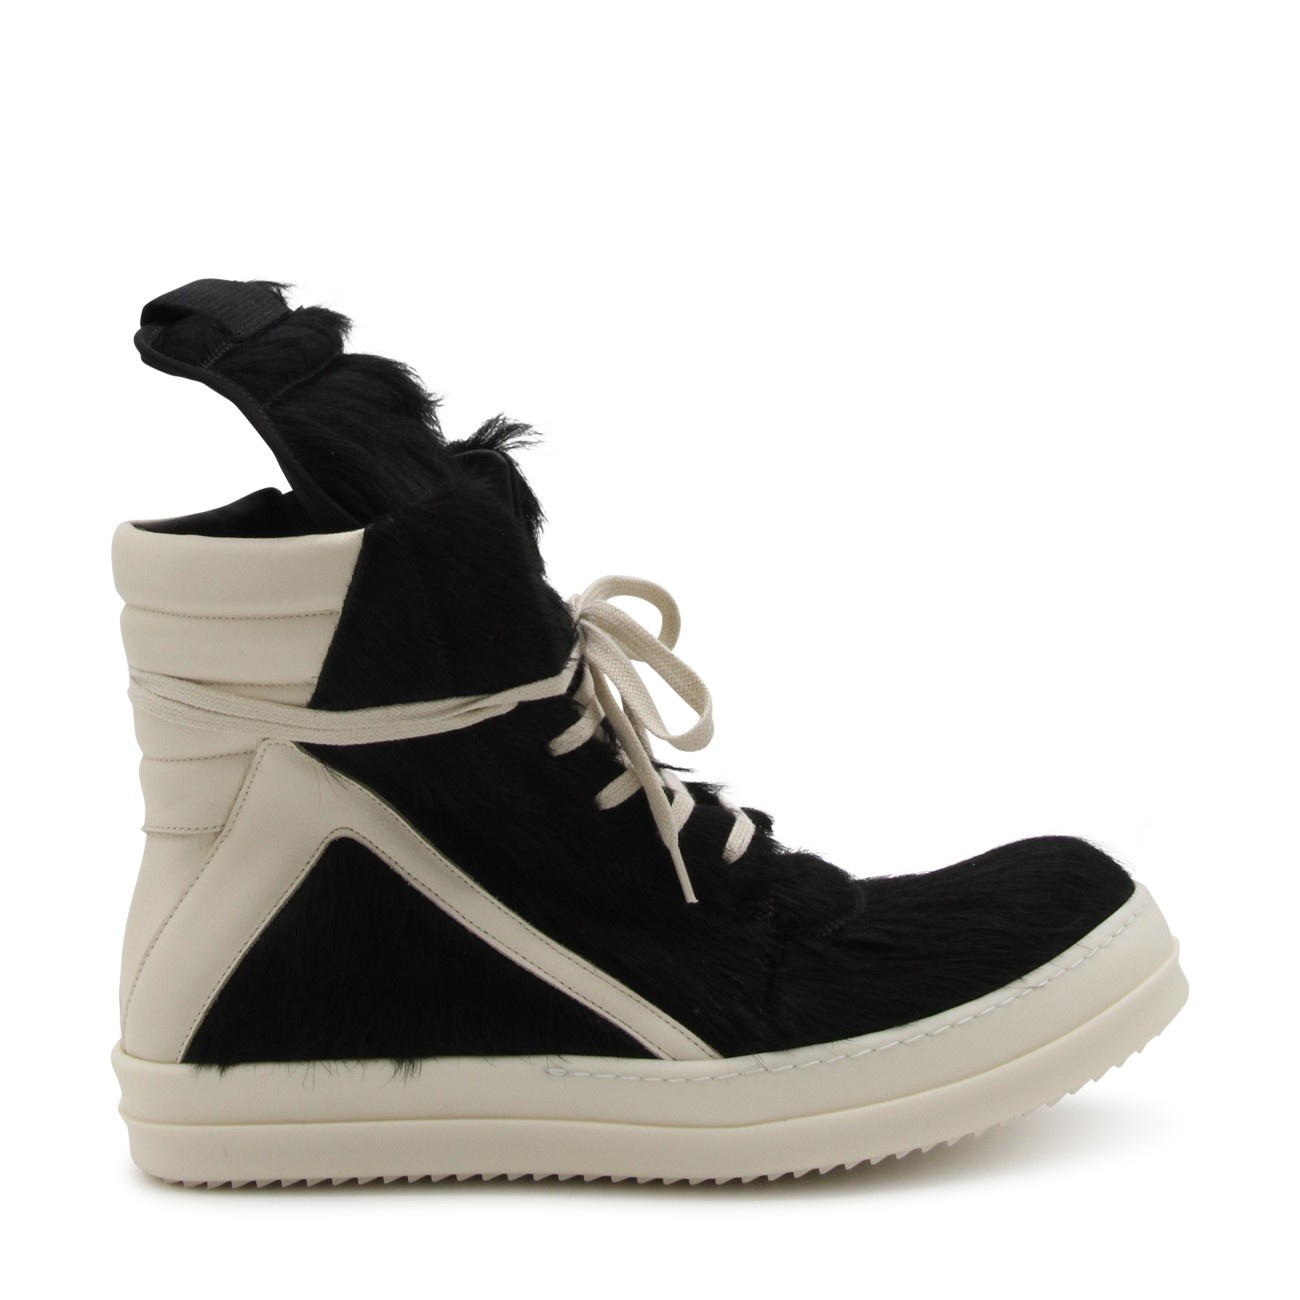 black and white leather geobasket sneakers - 1